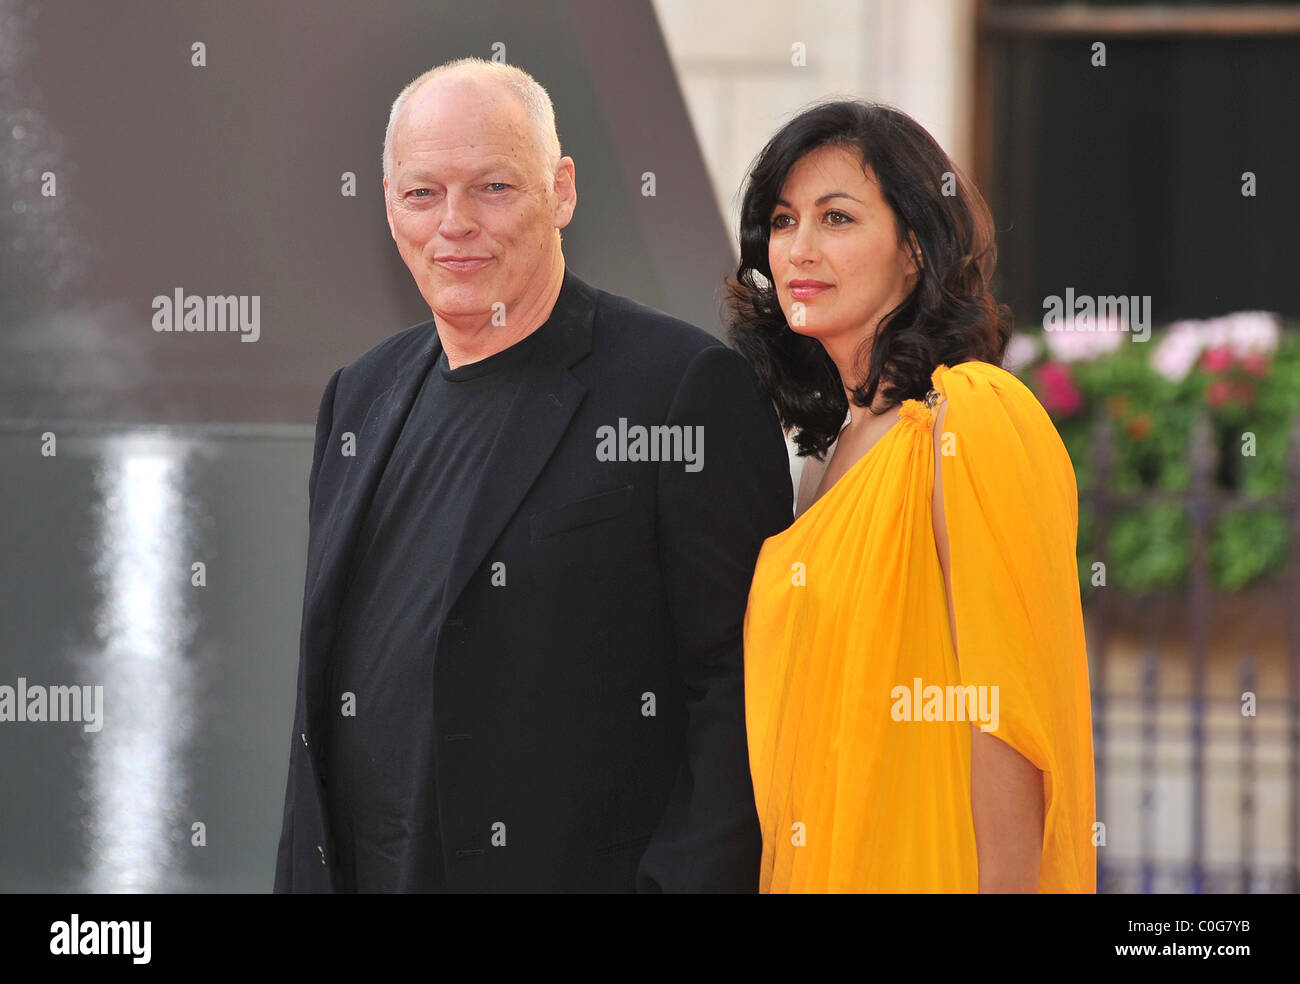 David Gilmour and Polly Samson Royal Academy Summer Exhibition 2008 - VIP private view held at the Royal Academy Of Arts - Stock Photo